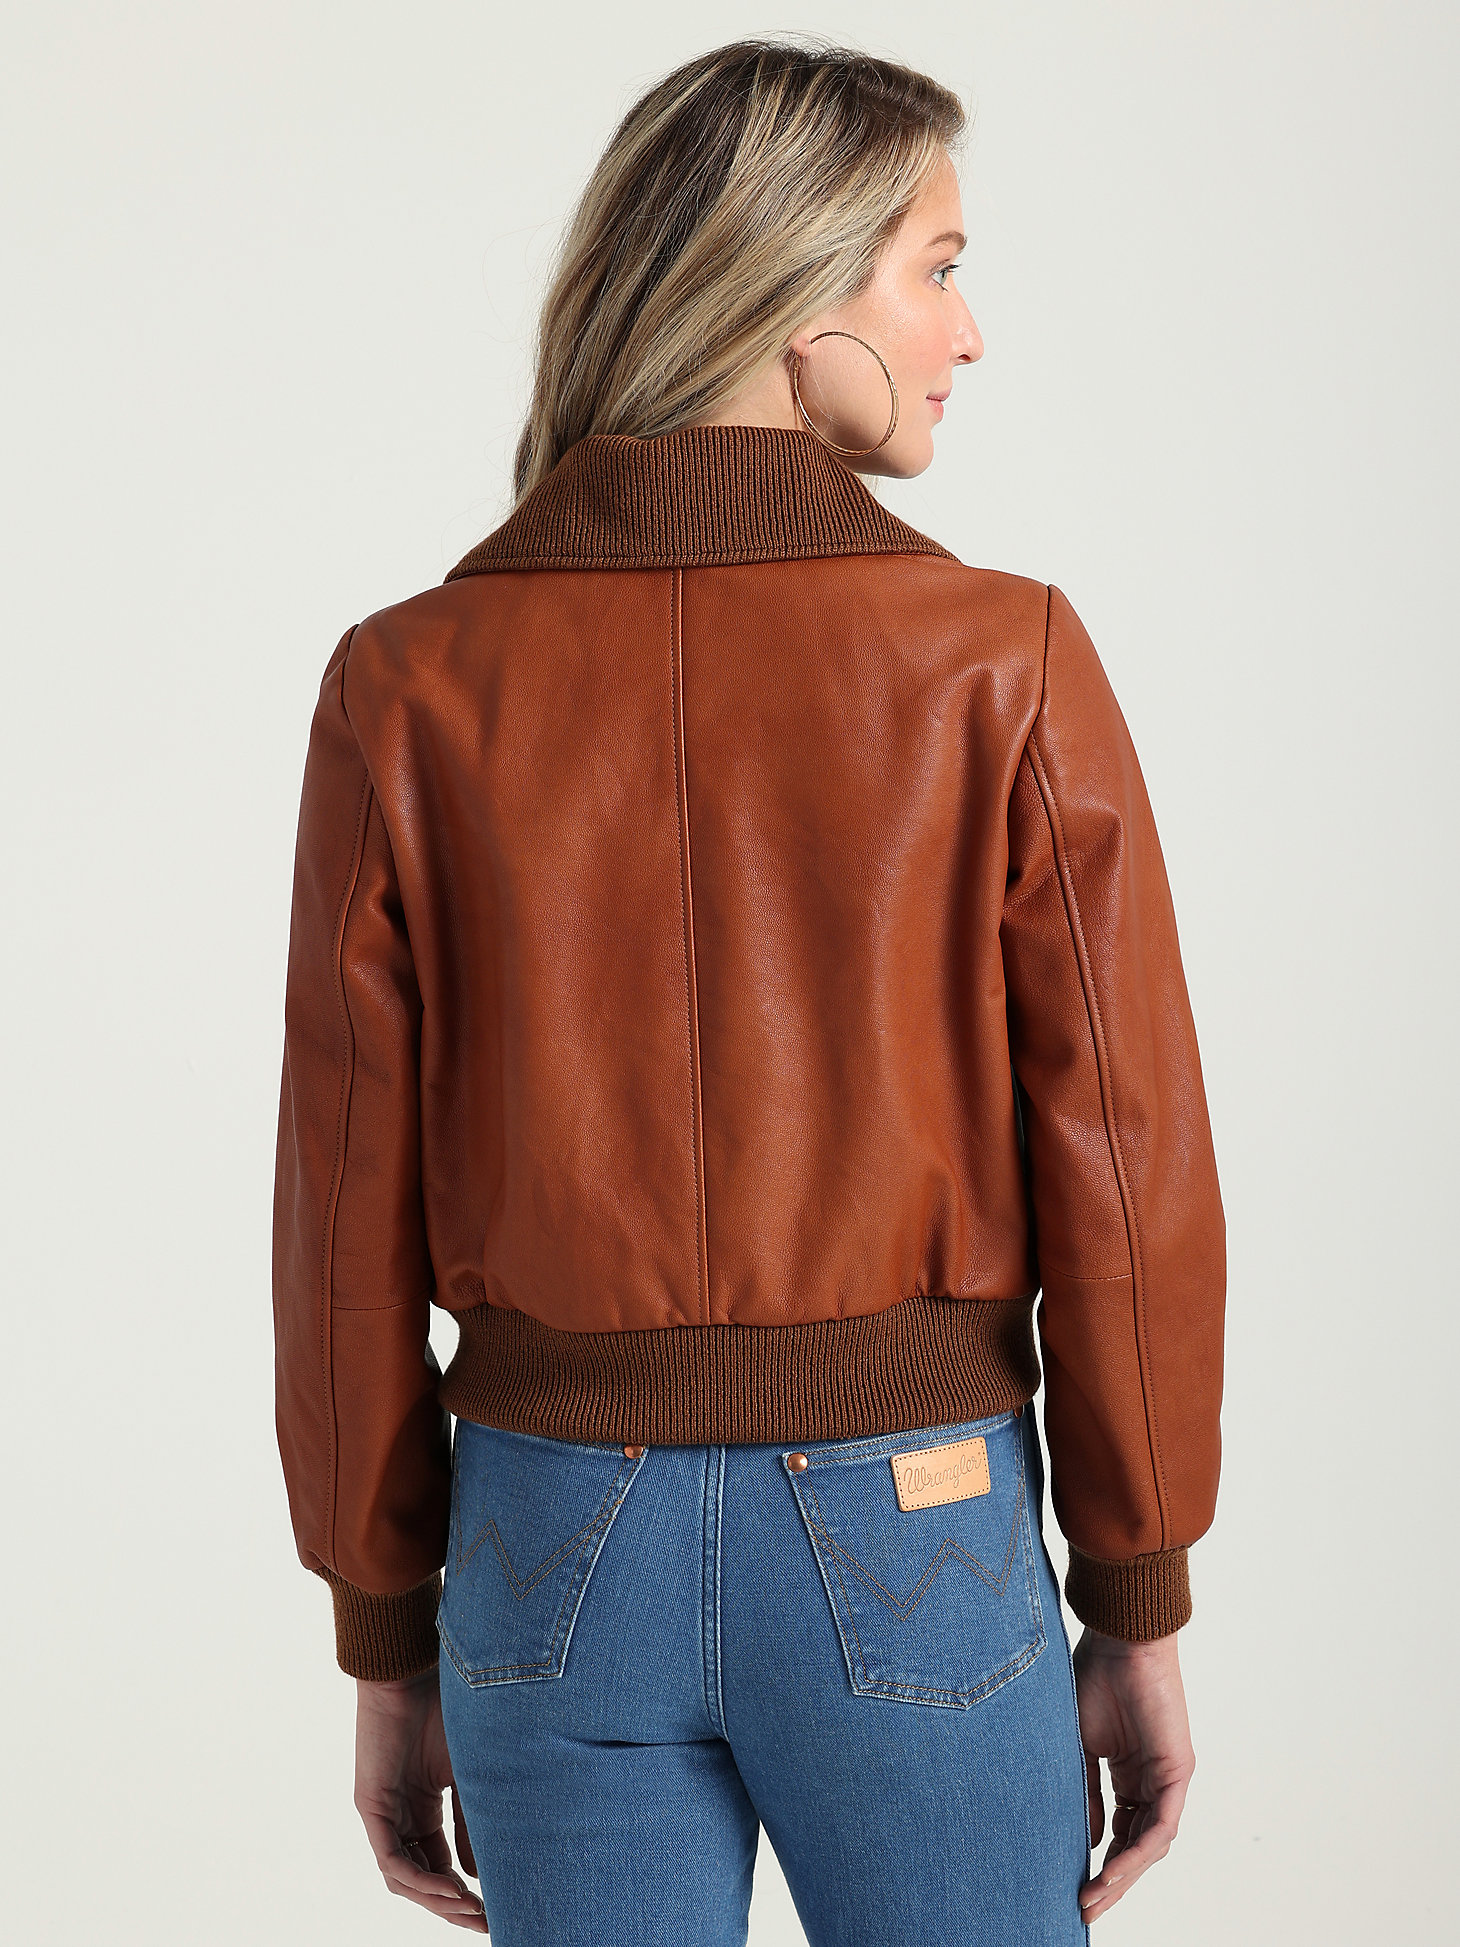 Leather Jacket in Cognac alternative view 3